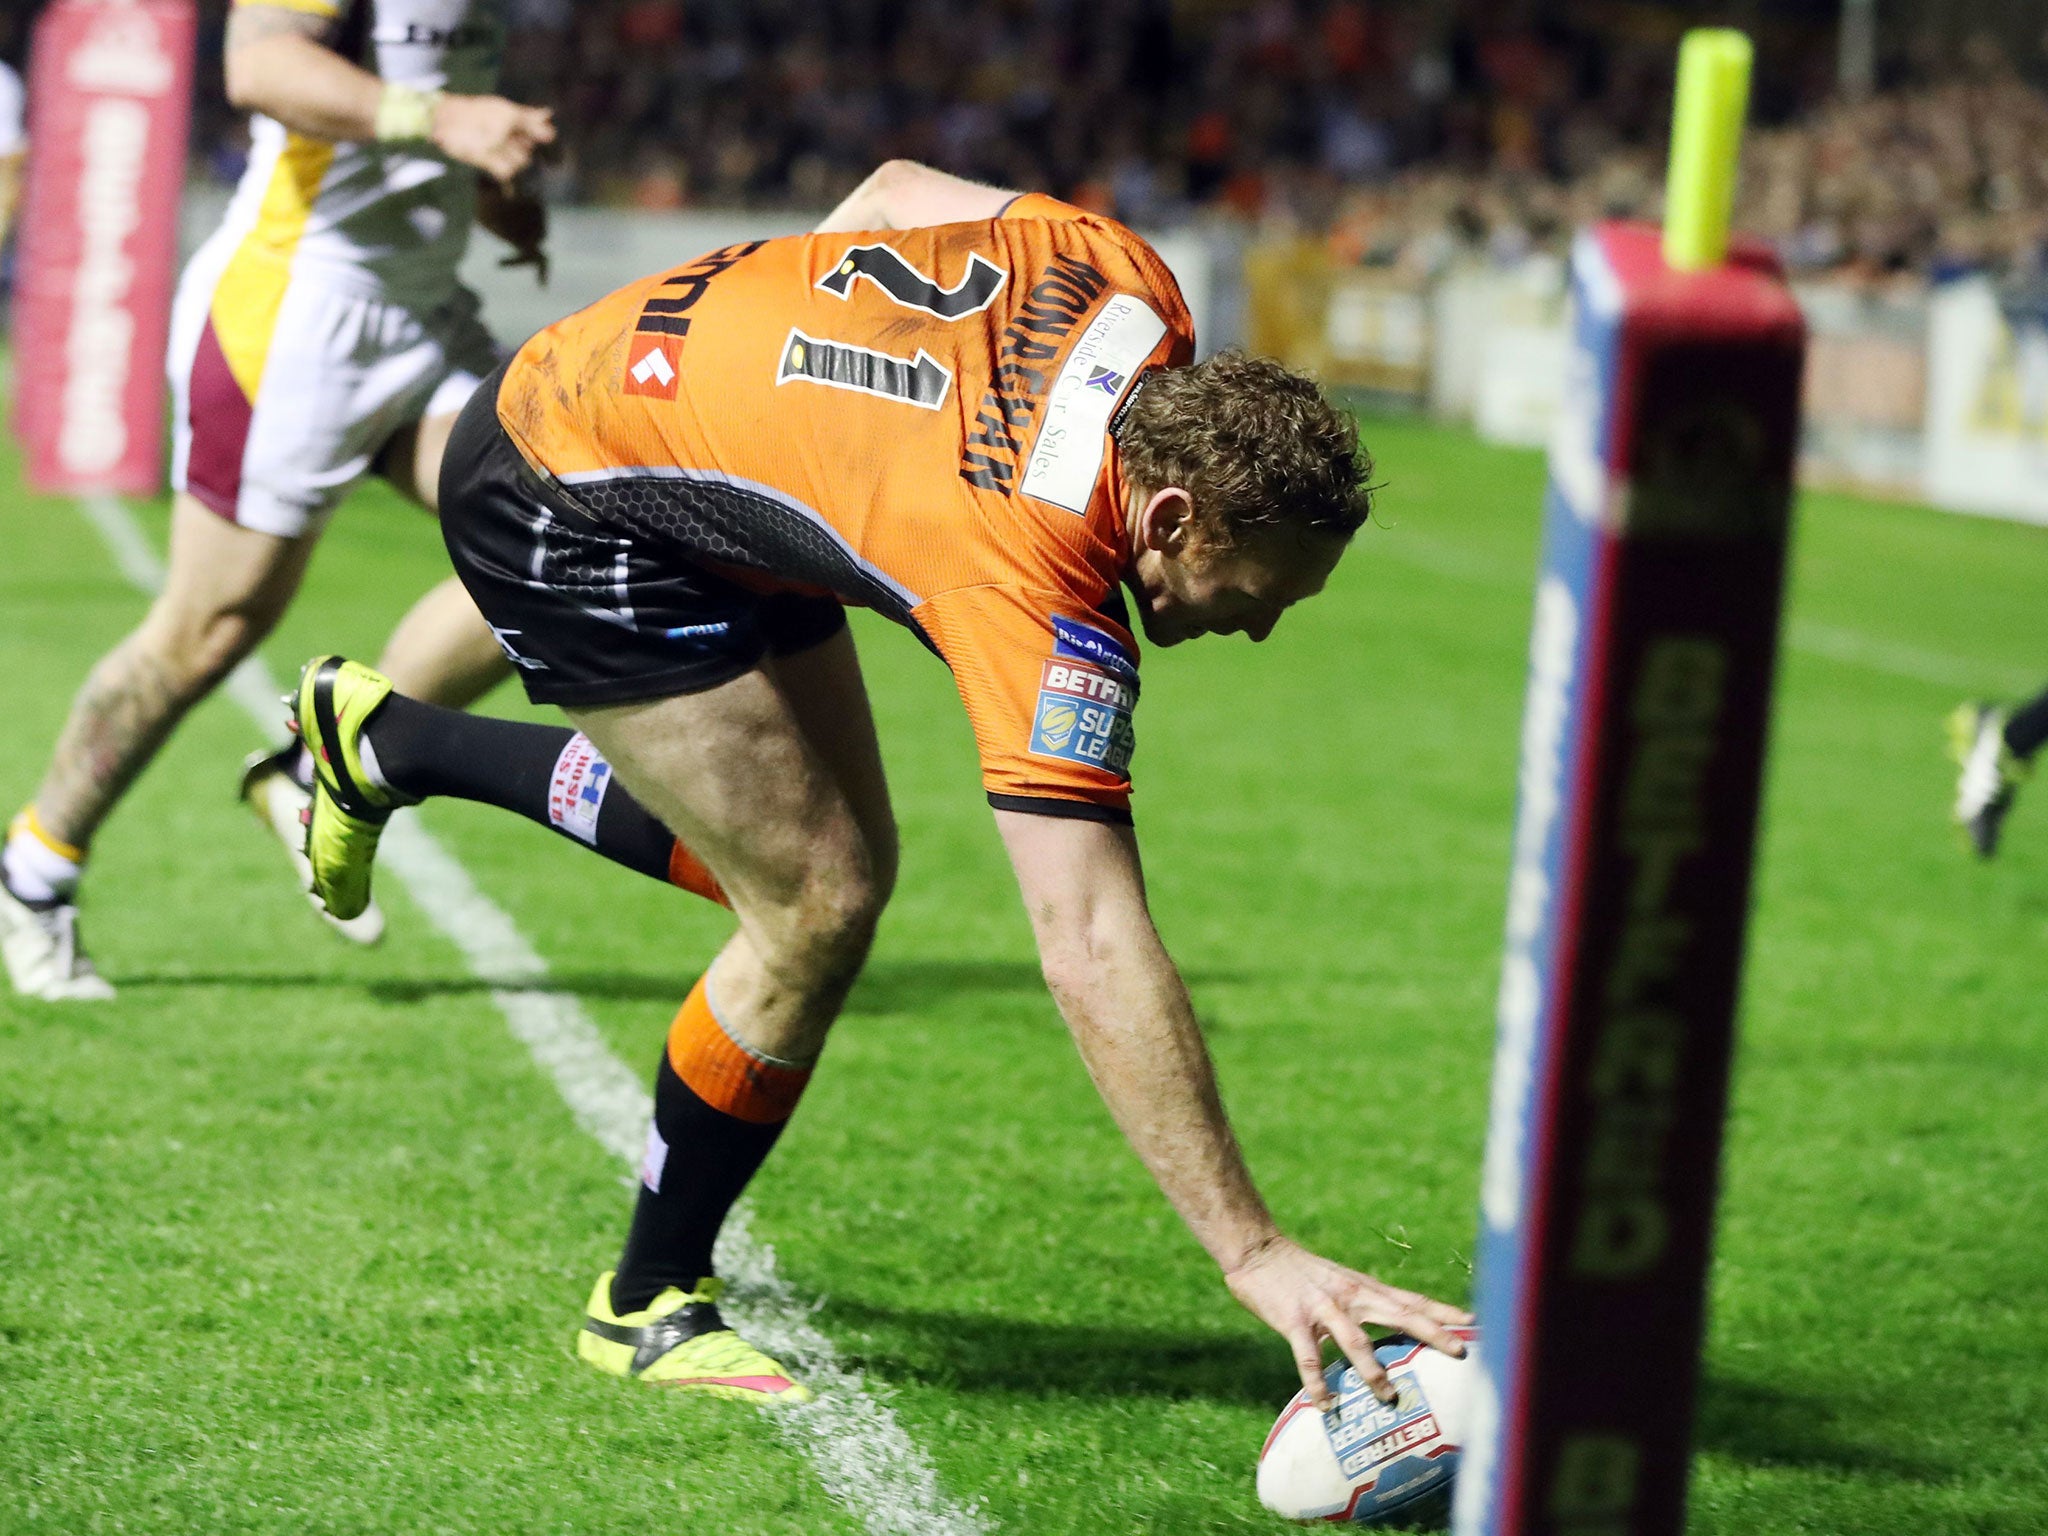 Joel Monaghan touches down for Castleford